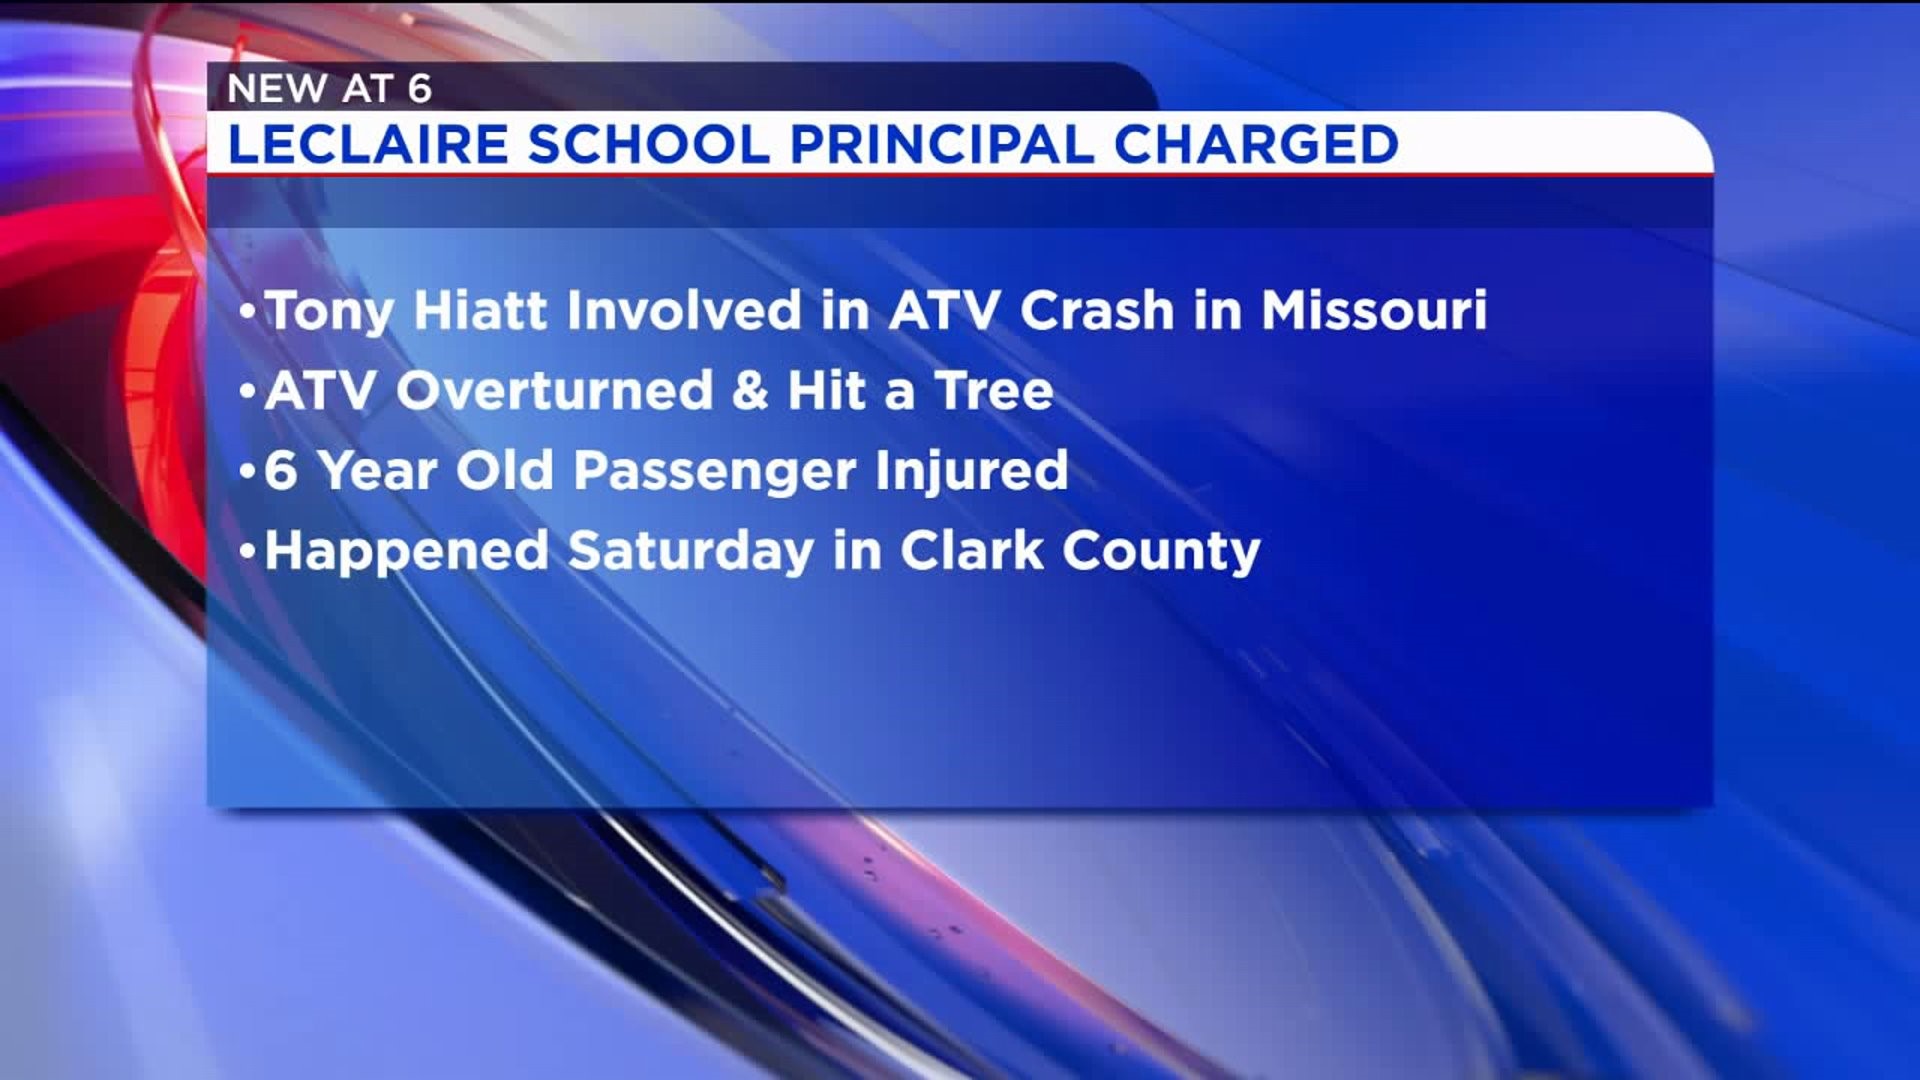 Bridgeview Elementary principal charged with DWI after ATV accident